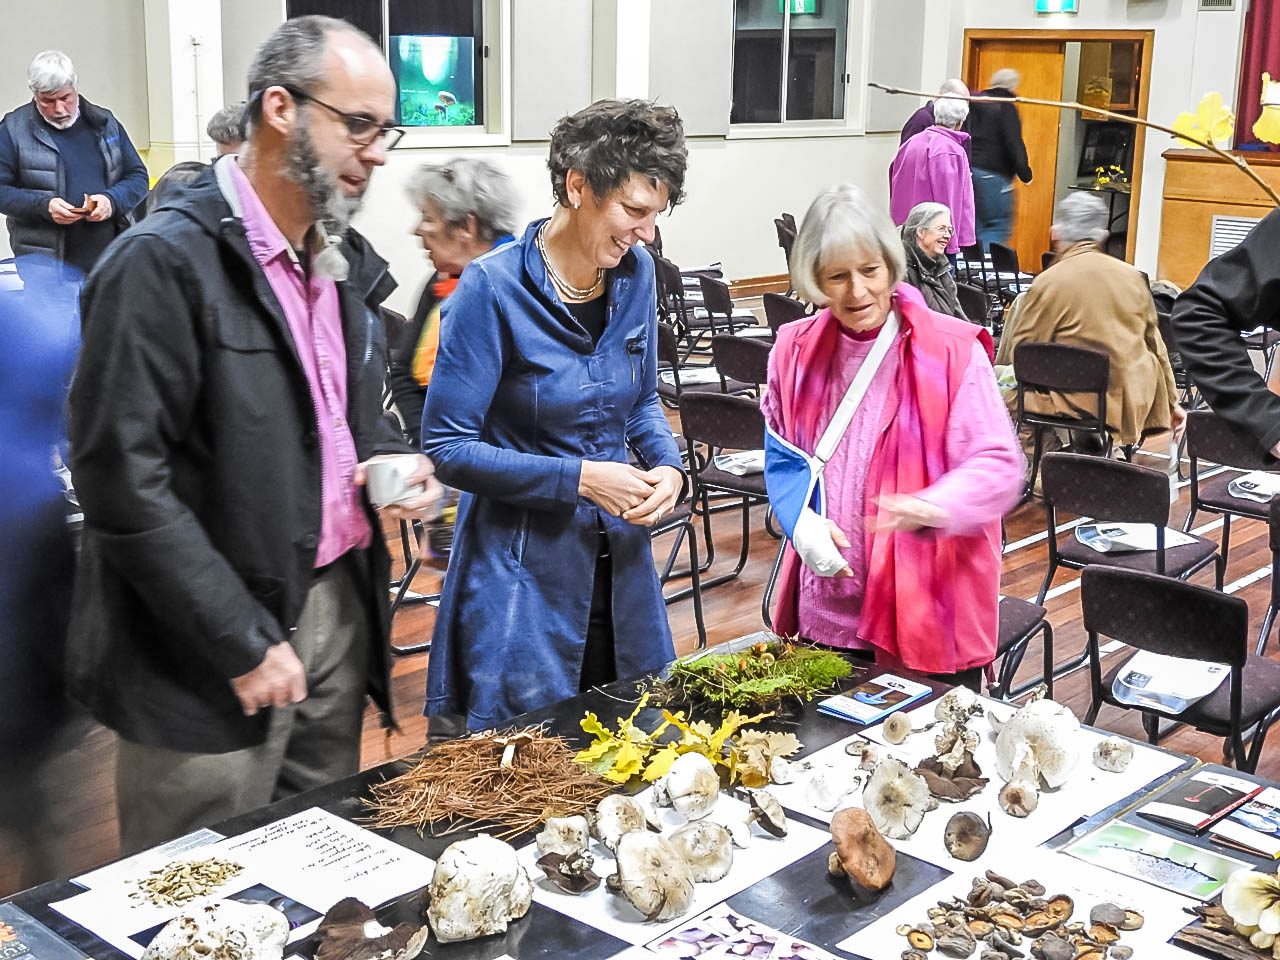 Fungi Festival Malaysian Feast and Intro Talk with Alison Pouliot